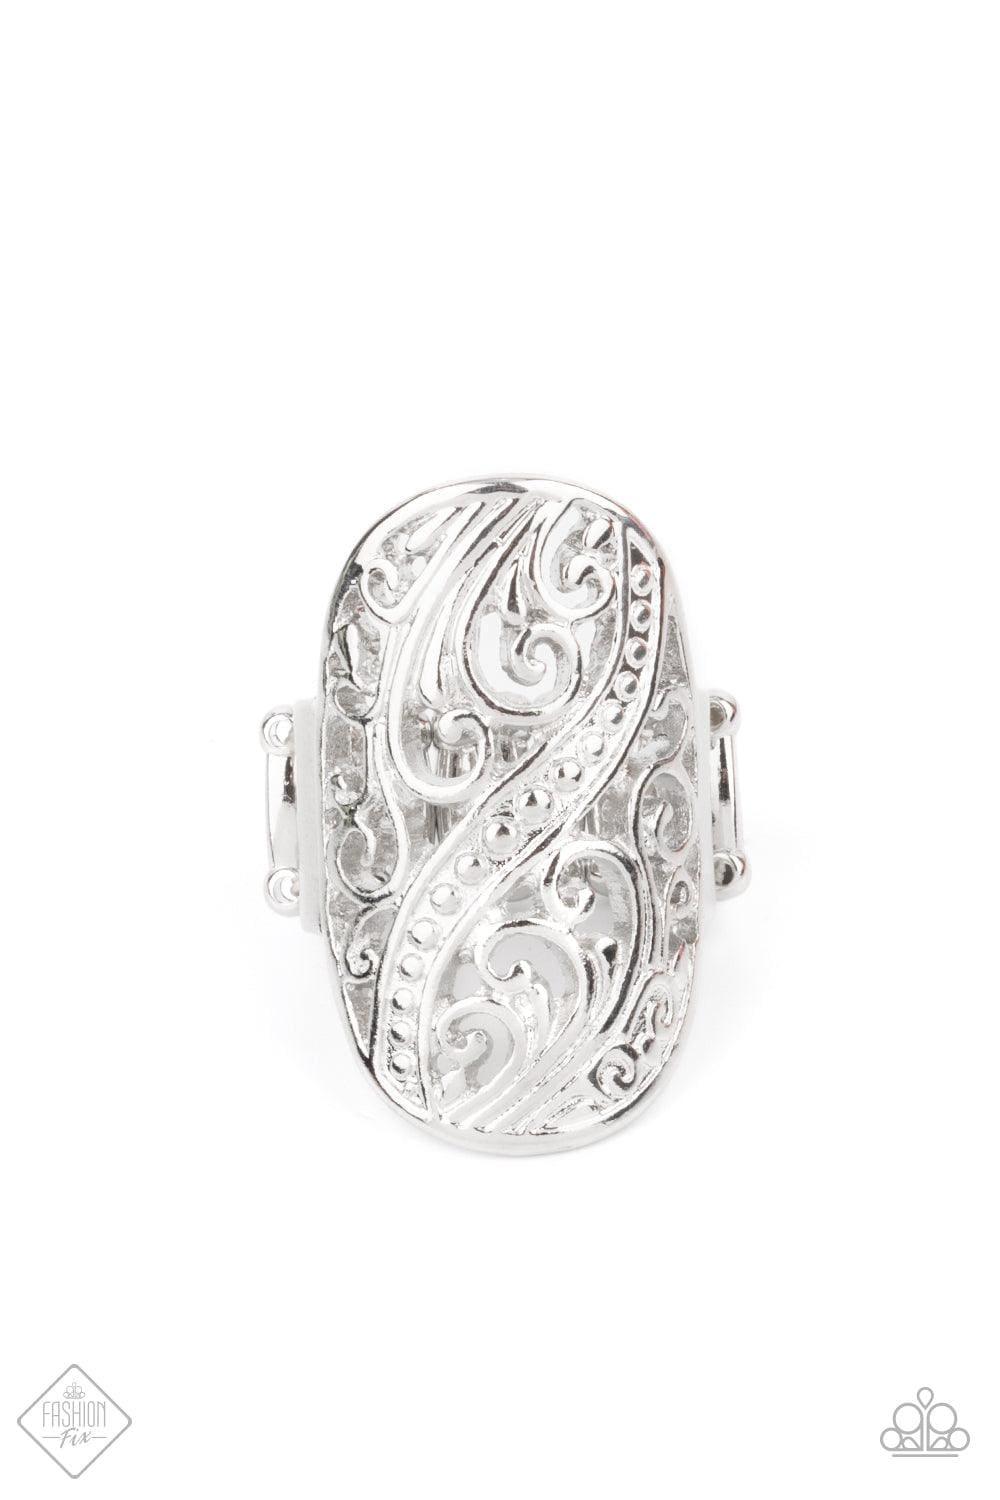 Paparazzi Accessories - Pier Paradise - Silver Ring - Bling by JessieK